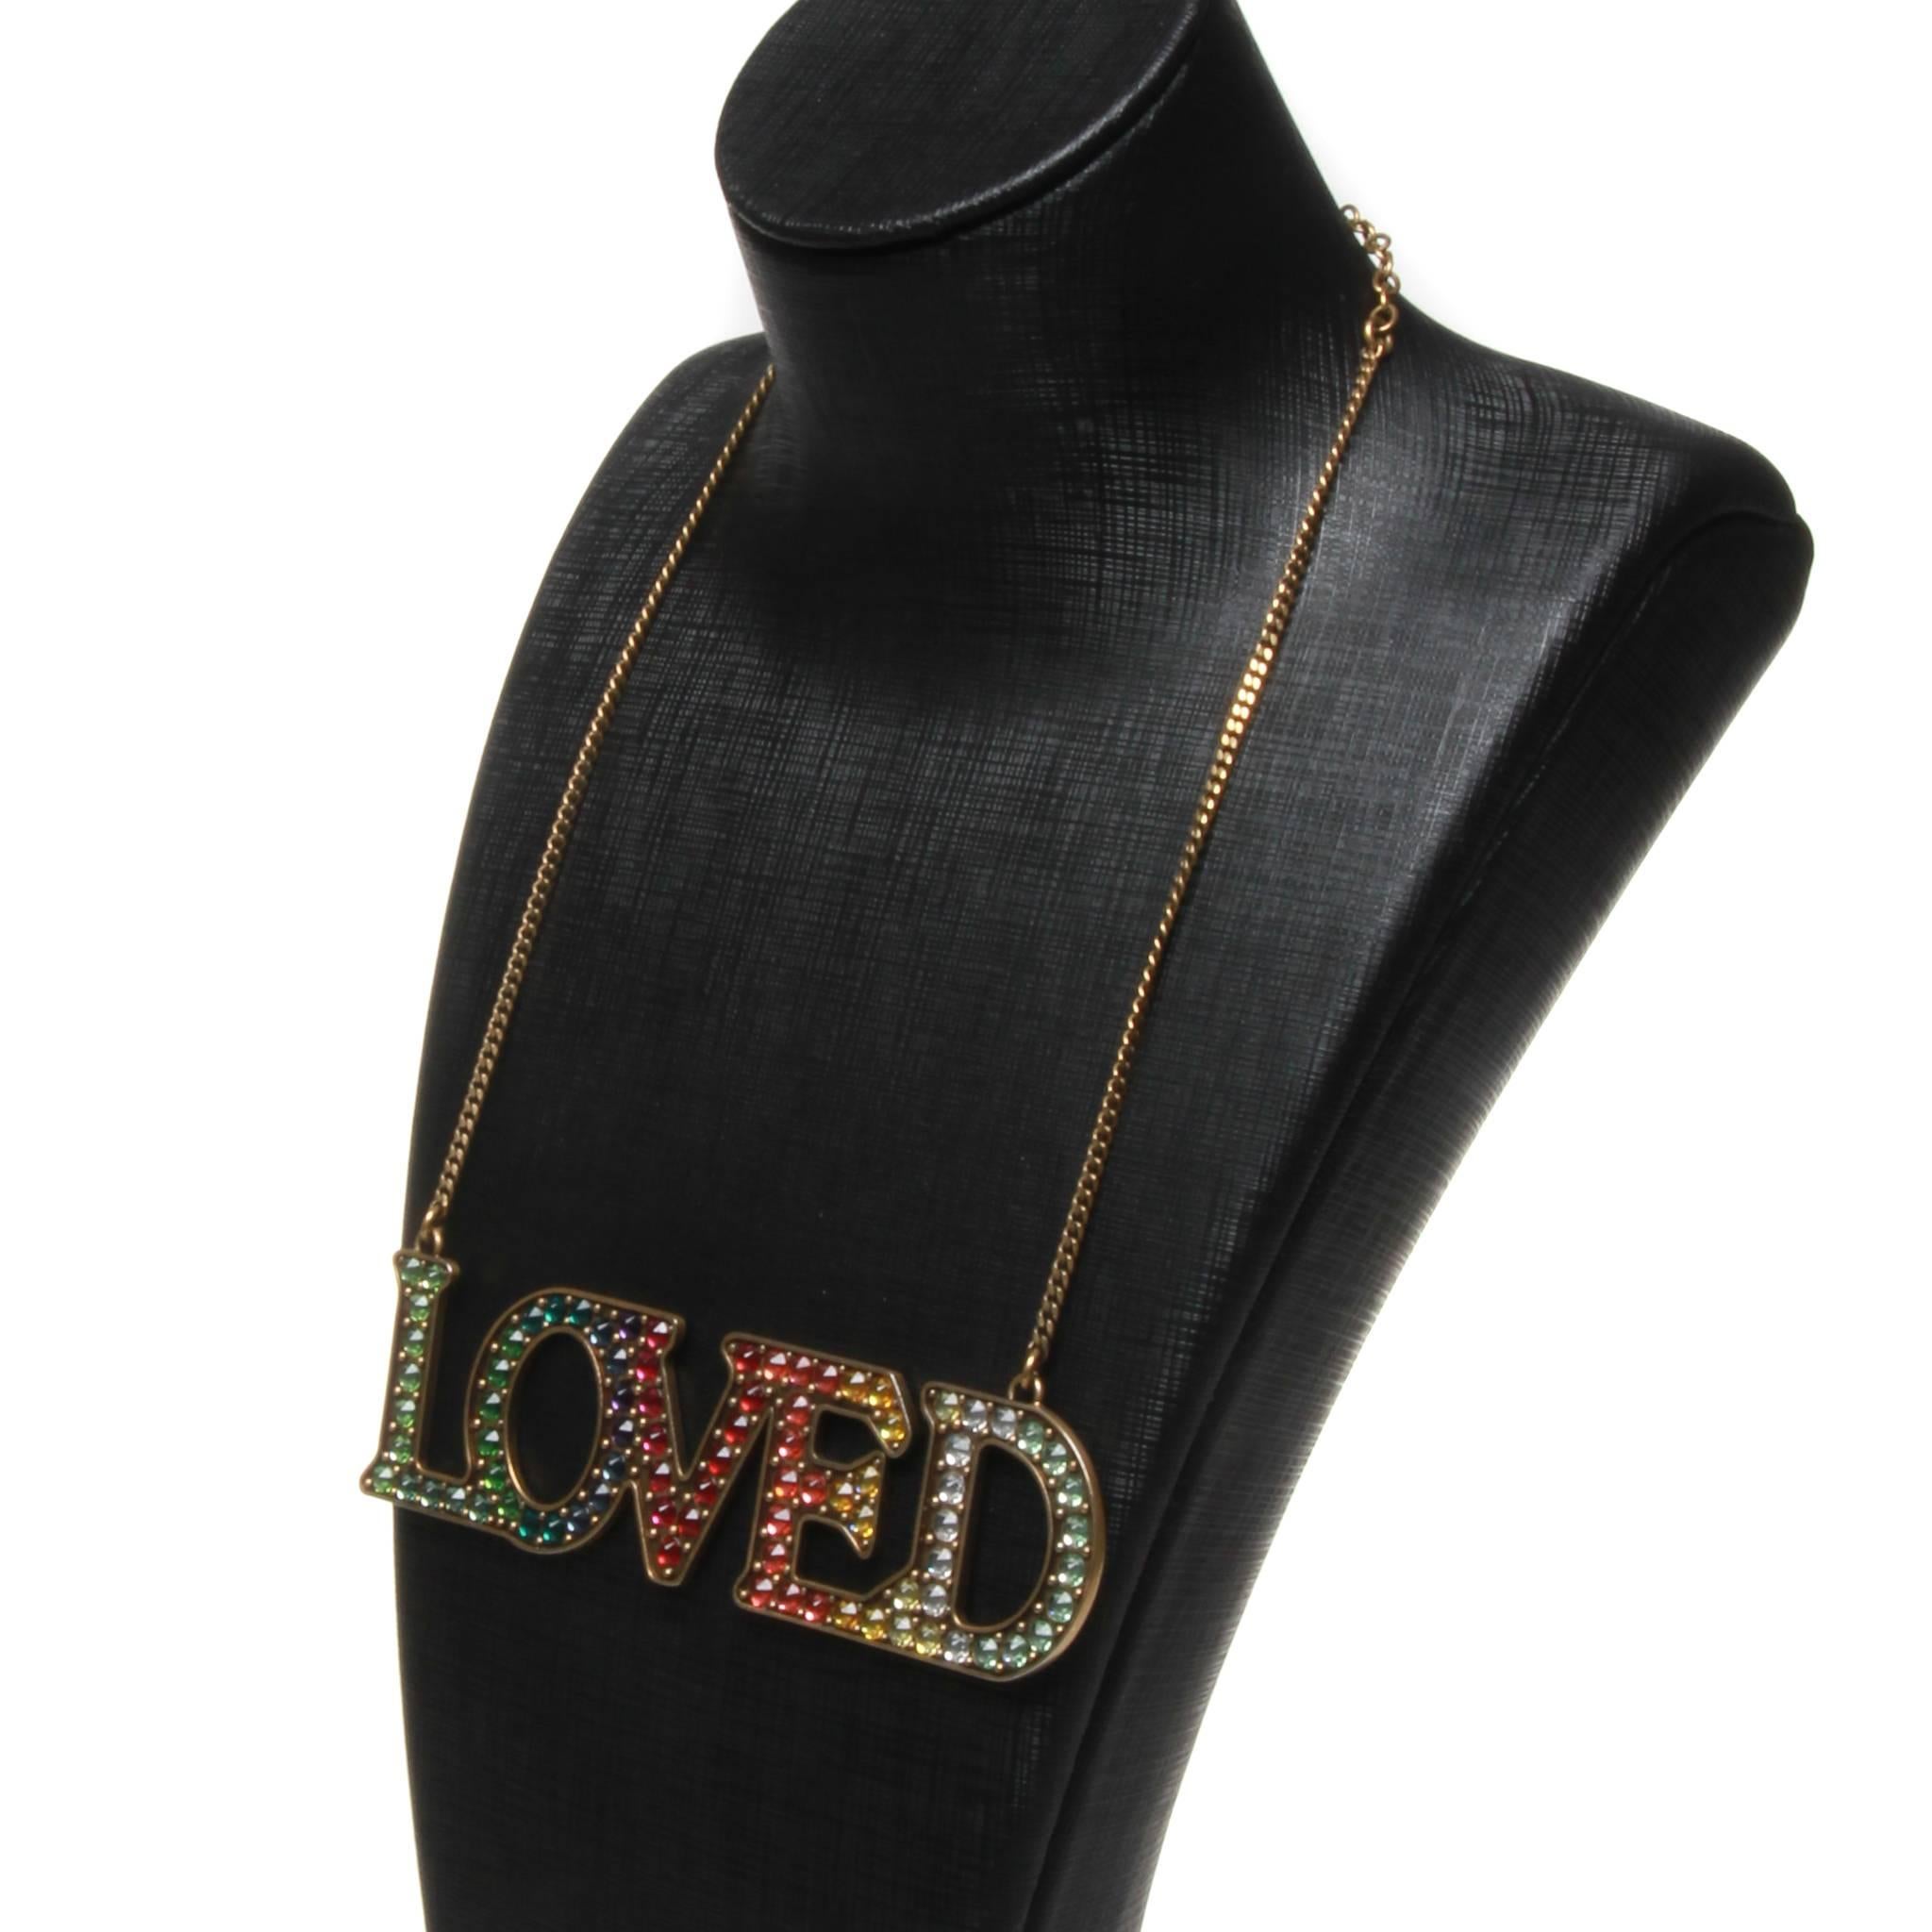 Gucci LOVED necklace in bronze/gold one metal encrusted with rainbow tone Swarovski crystals. 

Adjustable 41-51cm